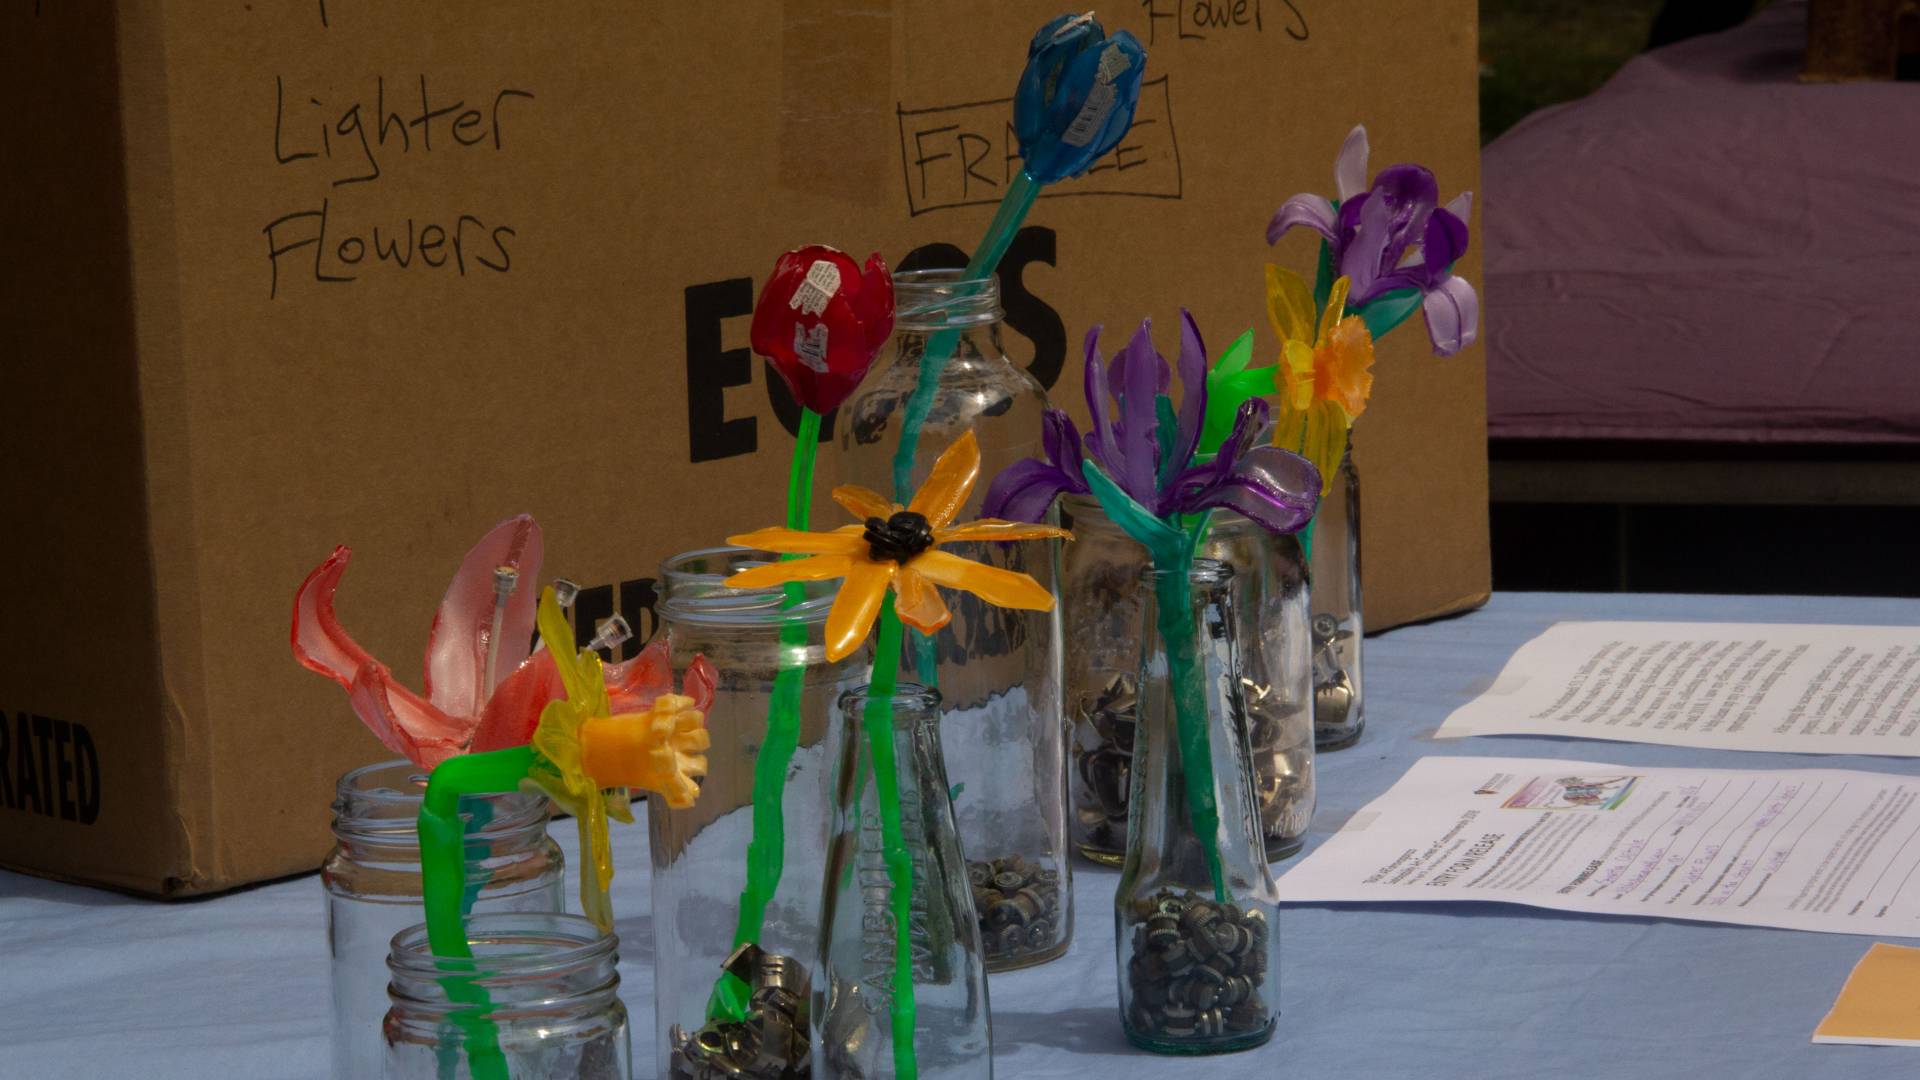 Flowers made from cigarette lighters for trash art competition